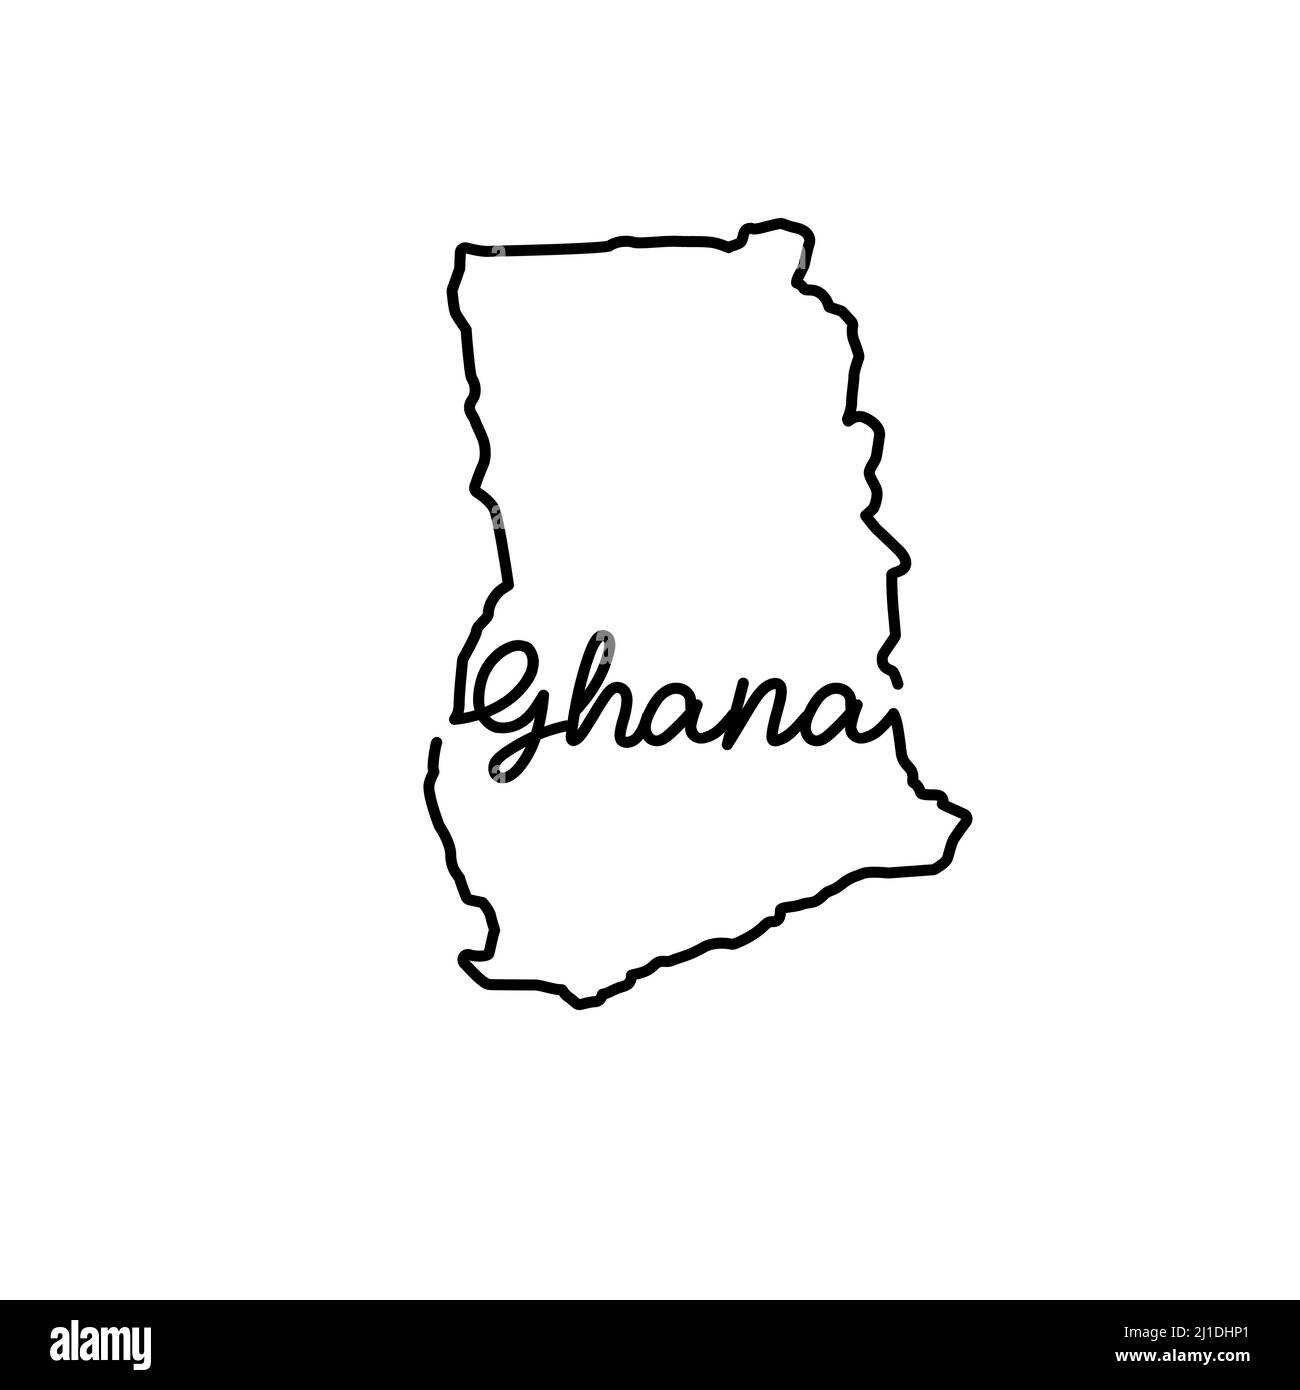 Ghana outline map with the handwritten country name. Continuous line drawing of patriotic home sign. A love for a small homeland. T-shirt print idea. Stock Vector